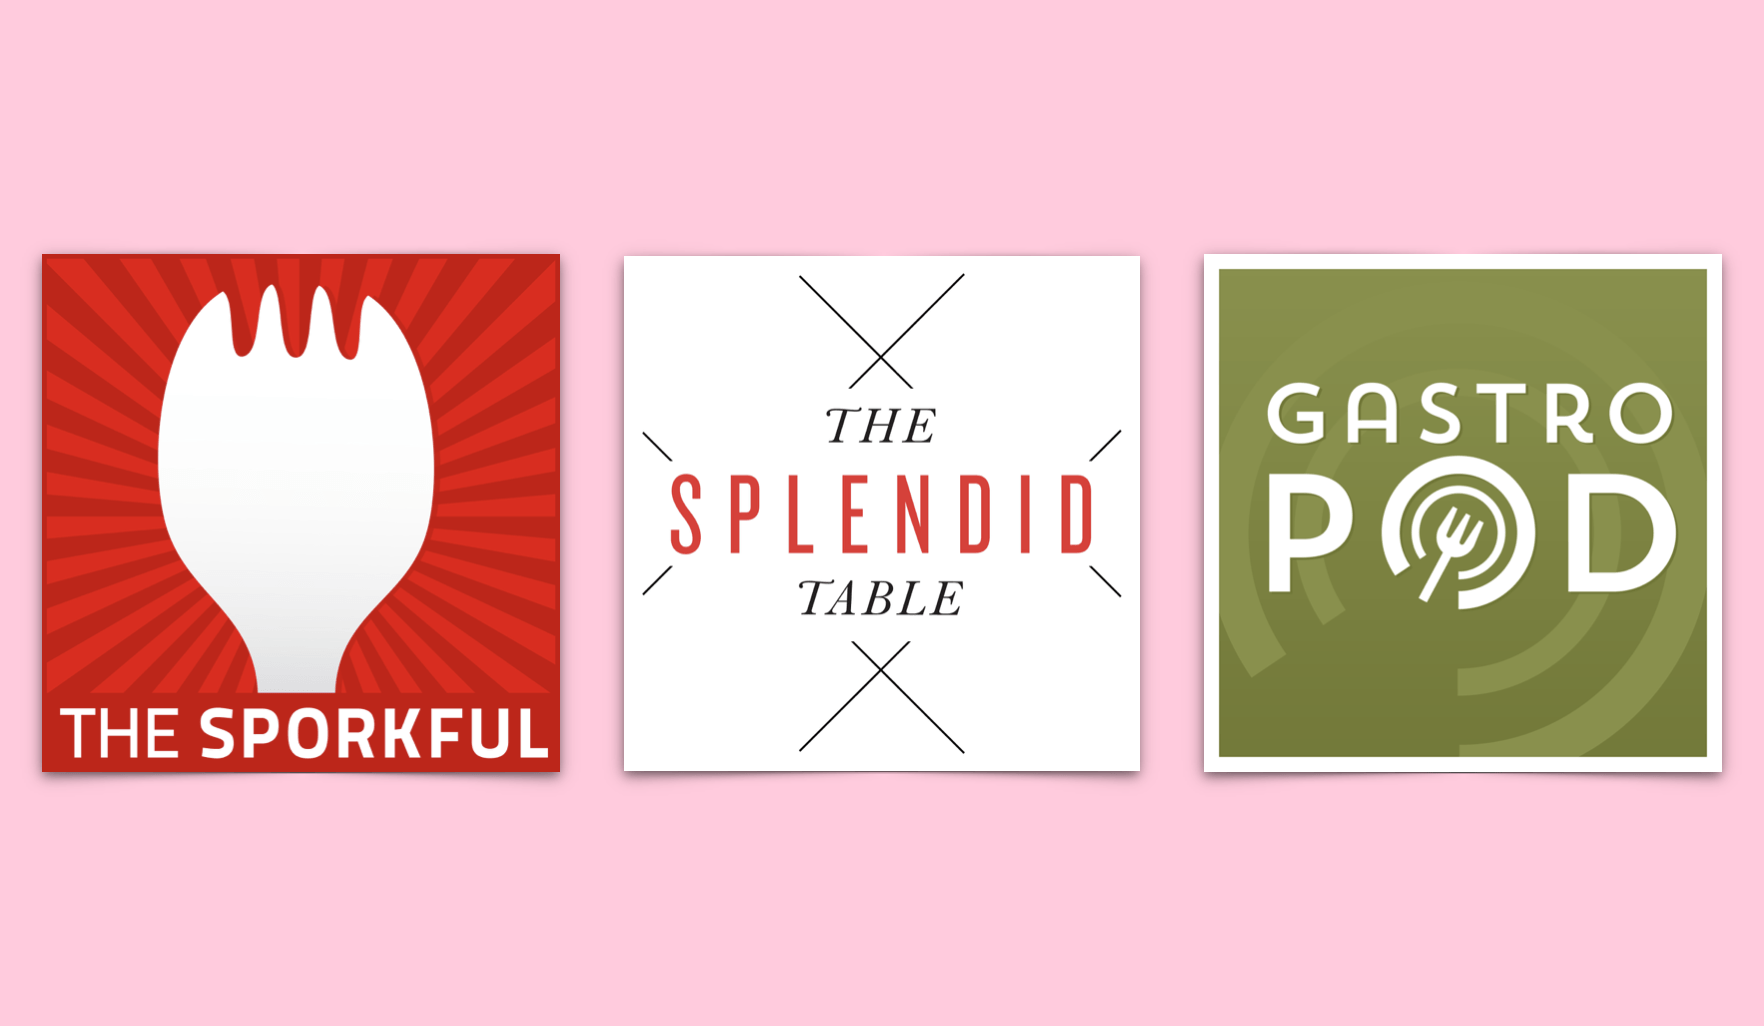 The Sporkful, The Splendid Table, and Gastropod